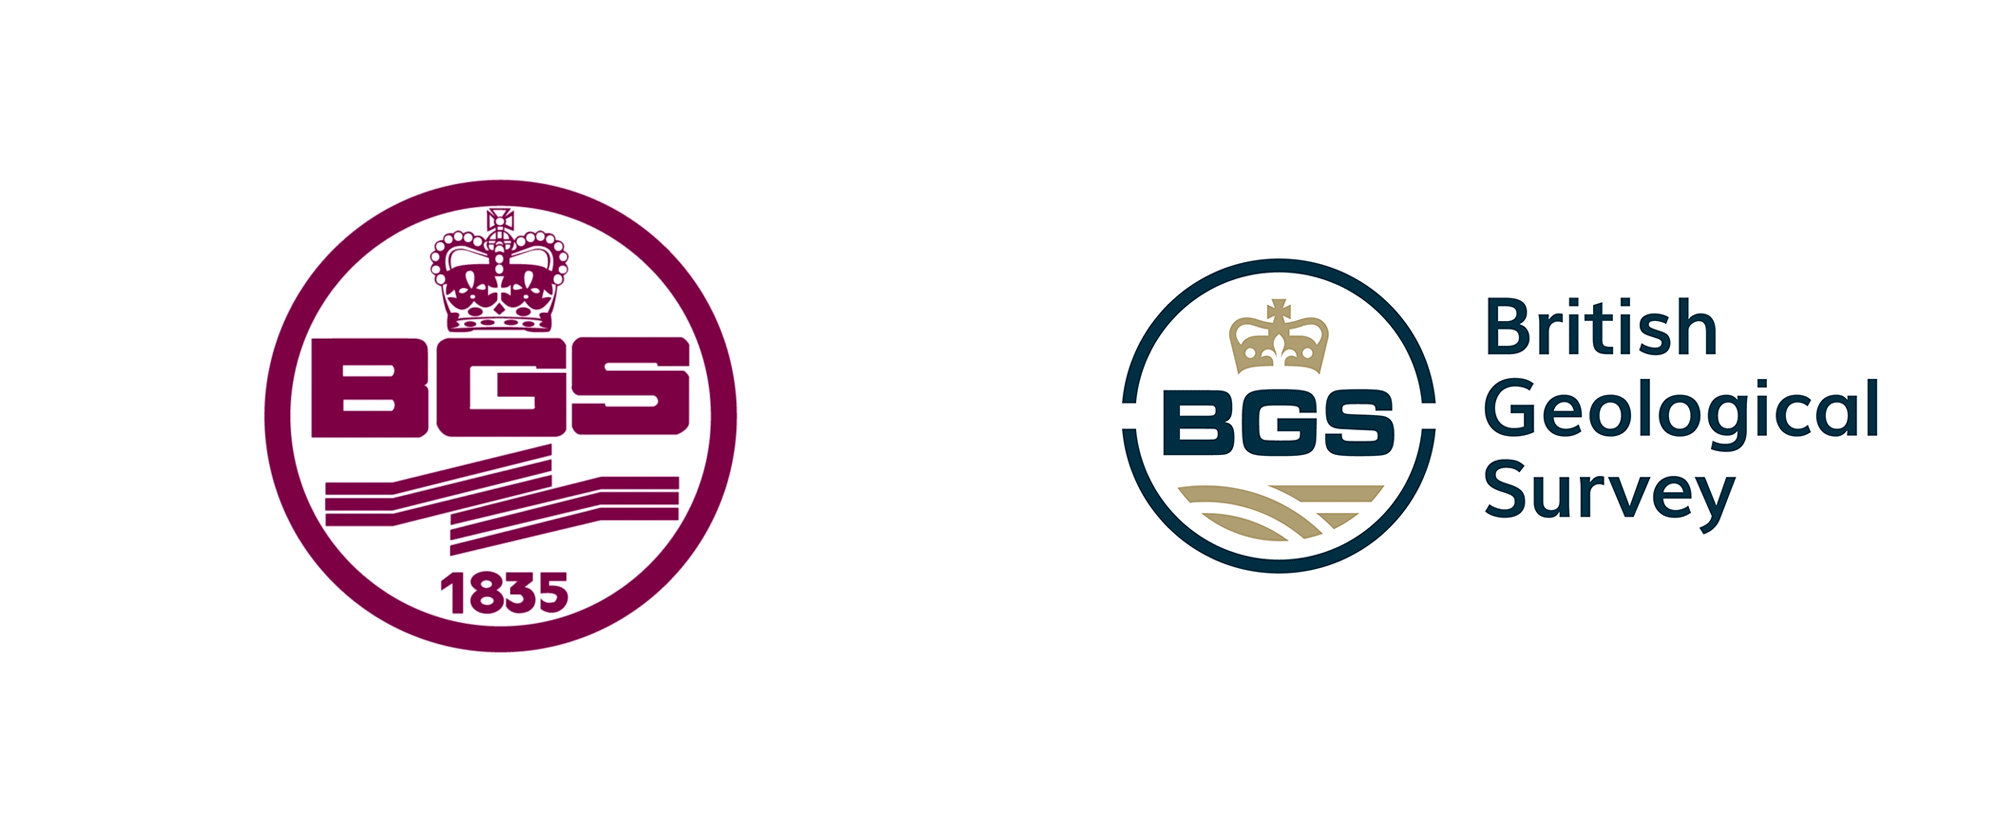 New Logo and Identity for British Geological Survey by Threerooms